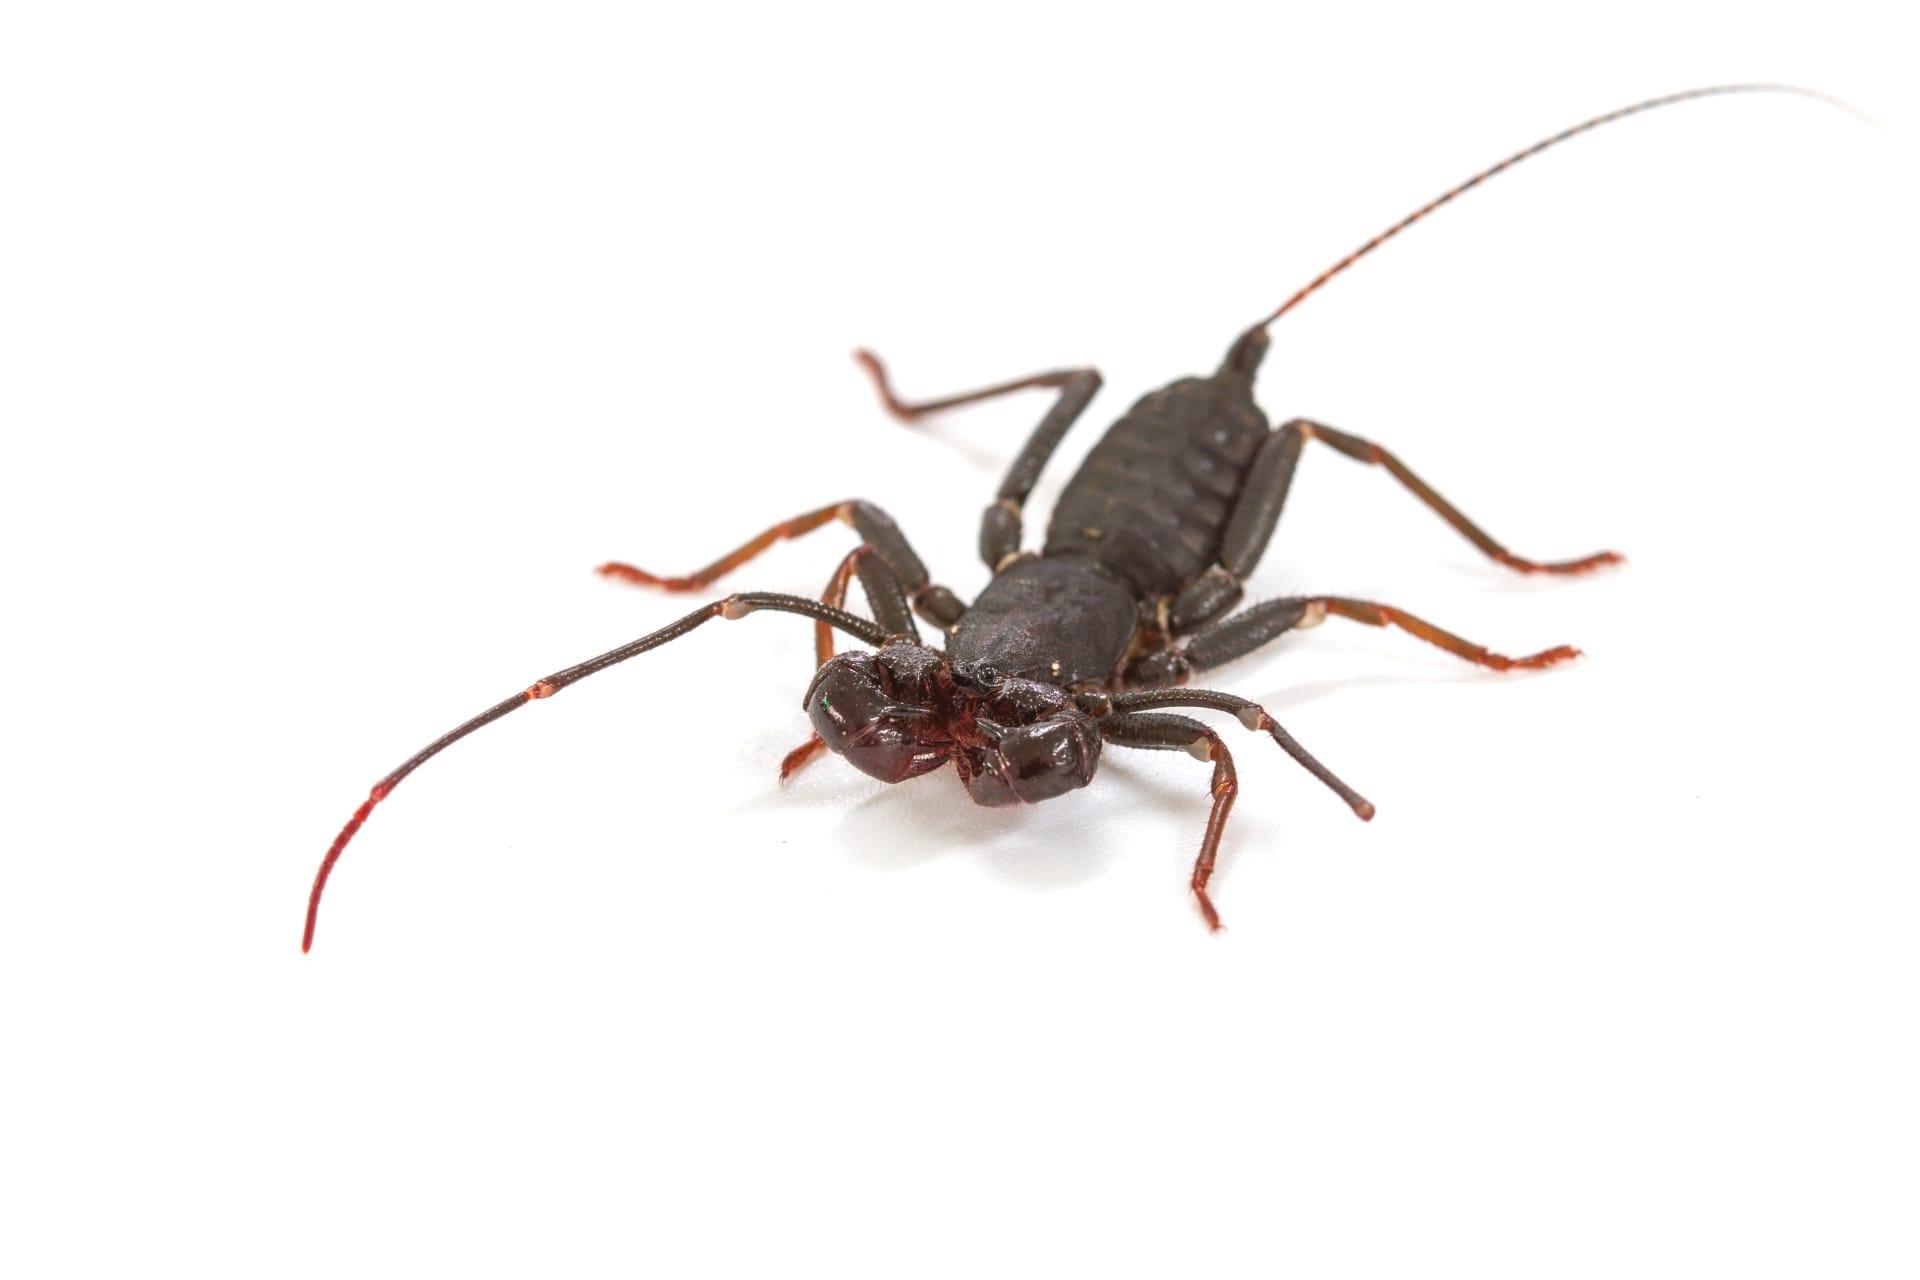 Whip scorpion pictures